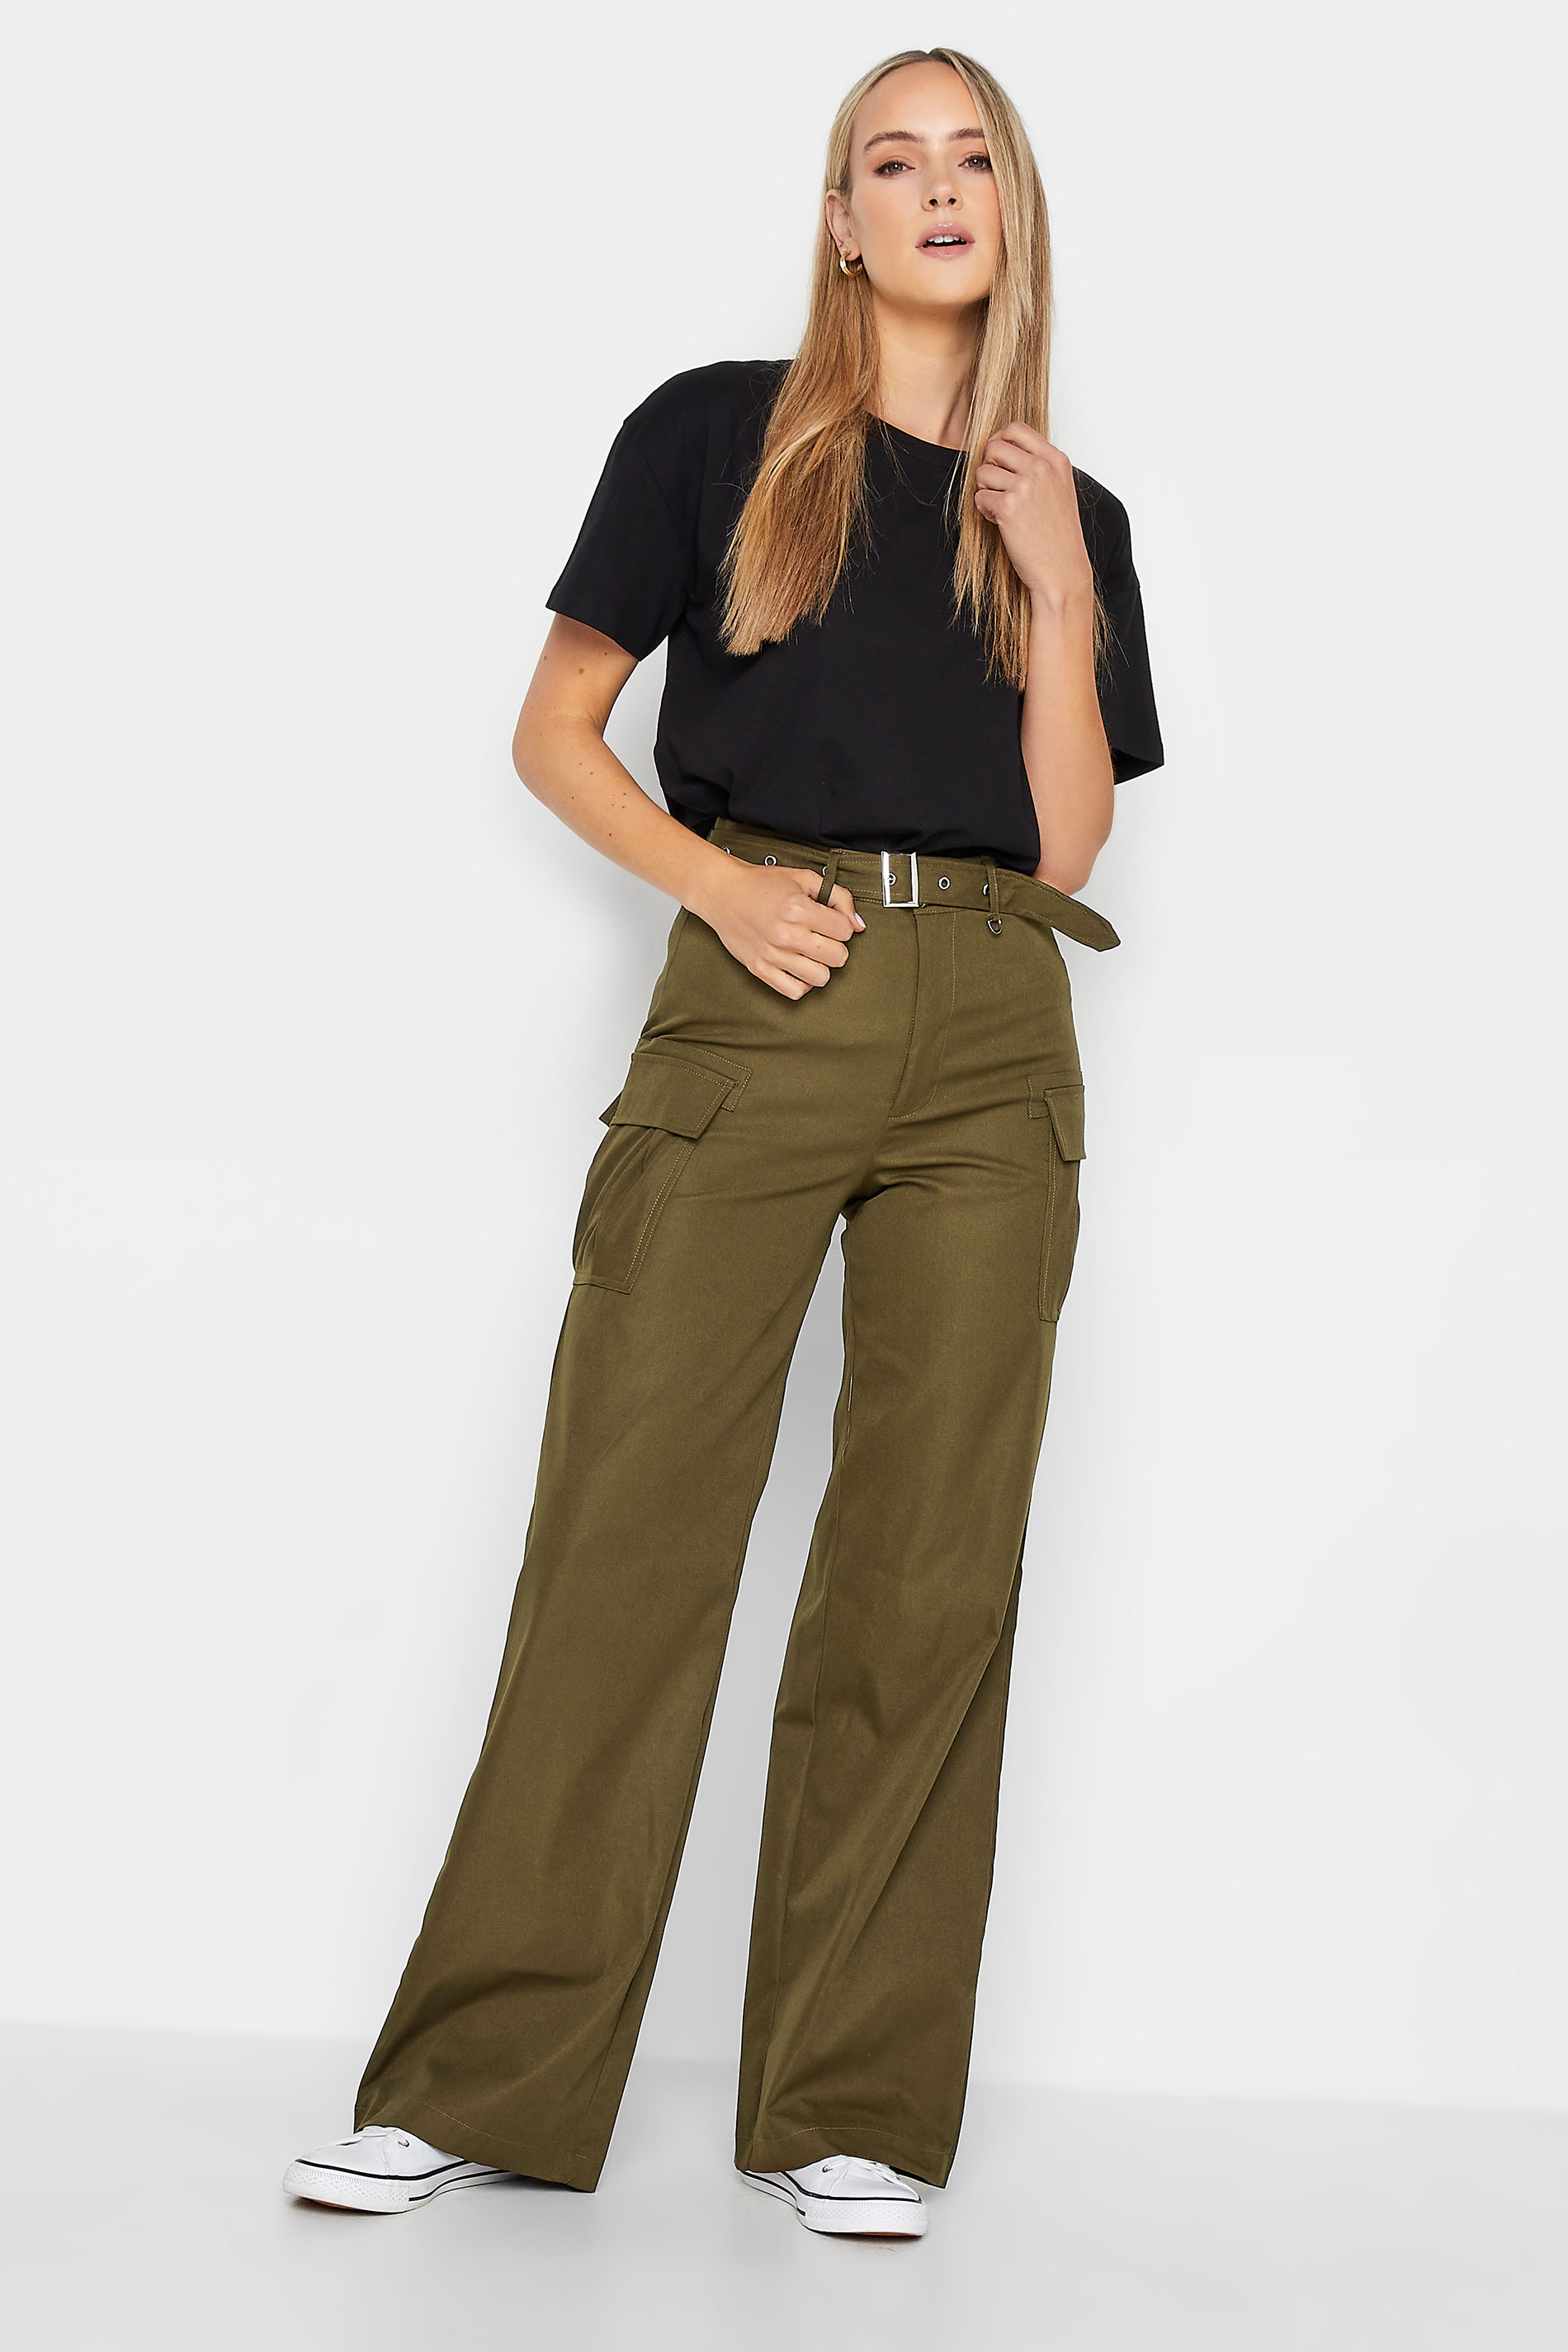 $310 Hudson Women's Green Cargo Stretch Jeans High Rise Trousers Pants Size  24 | eBay